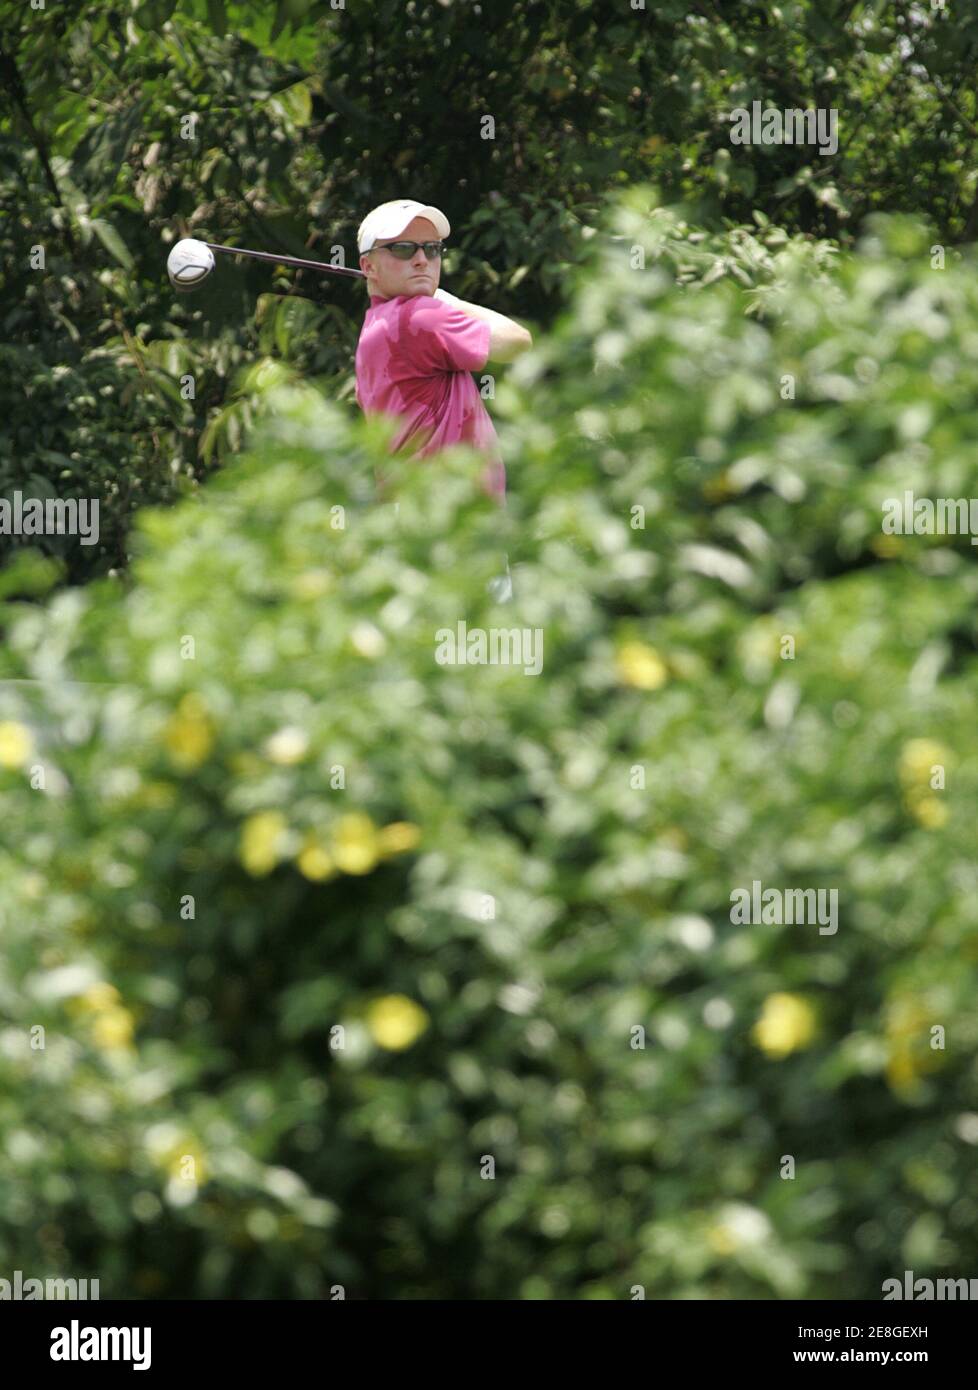 Simon Dyson of Britain watches his drives on the sixth hole during the final round of Indonesia Open golf tournament at Emeralda Golf Club in Cimanggis, West Java province March 5, 2006. REUTERS/Beawiharta Stock Photo